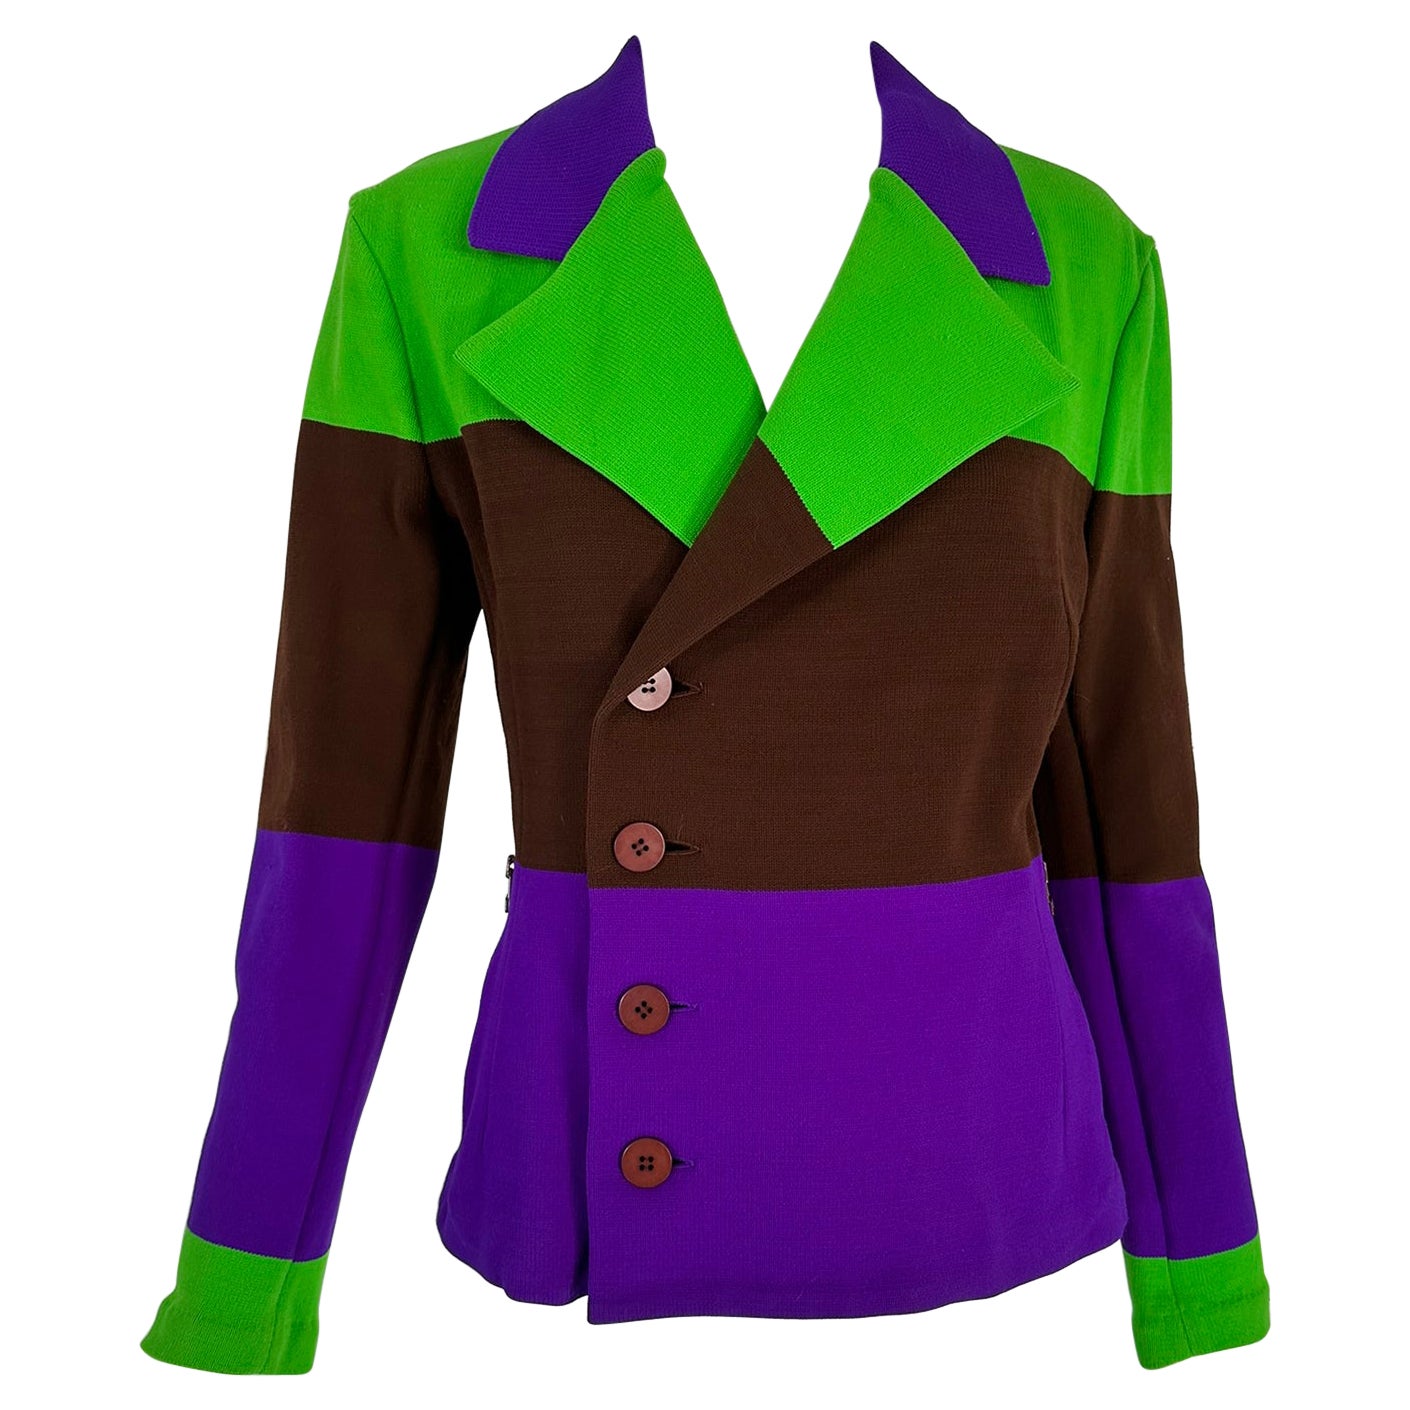 Issey Miyake Colour Block Nylon Knit Jacket in Acid Green Brown & Purple Small For Sale